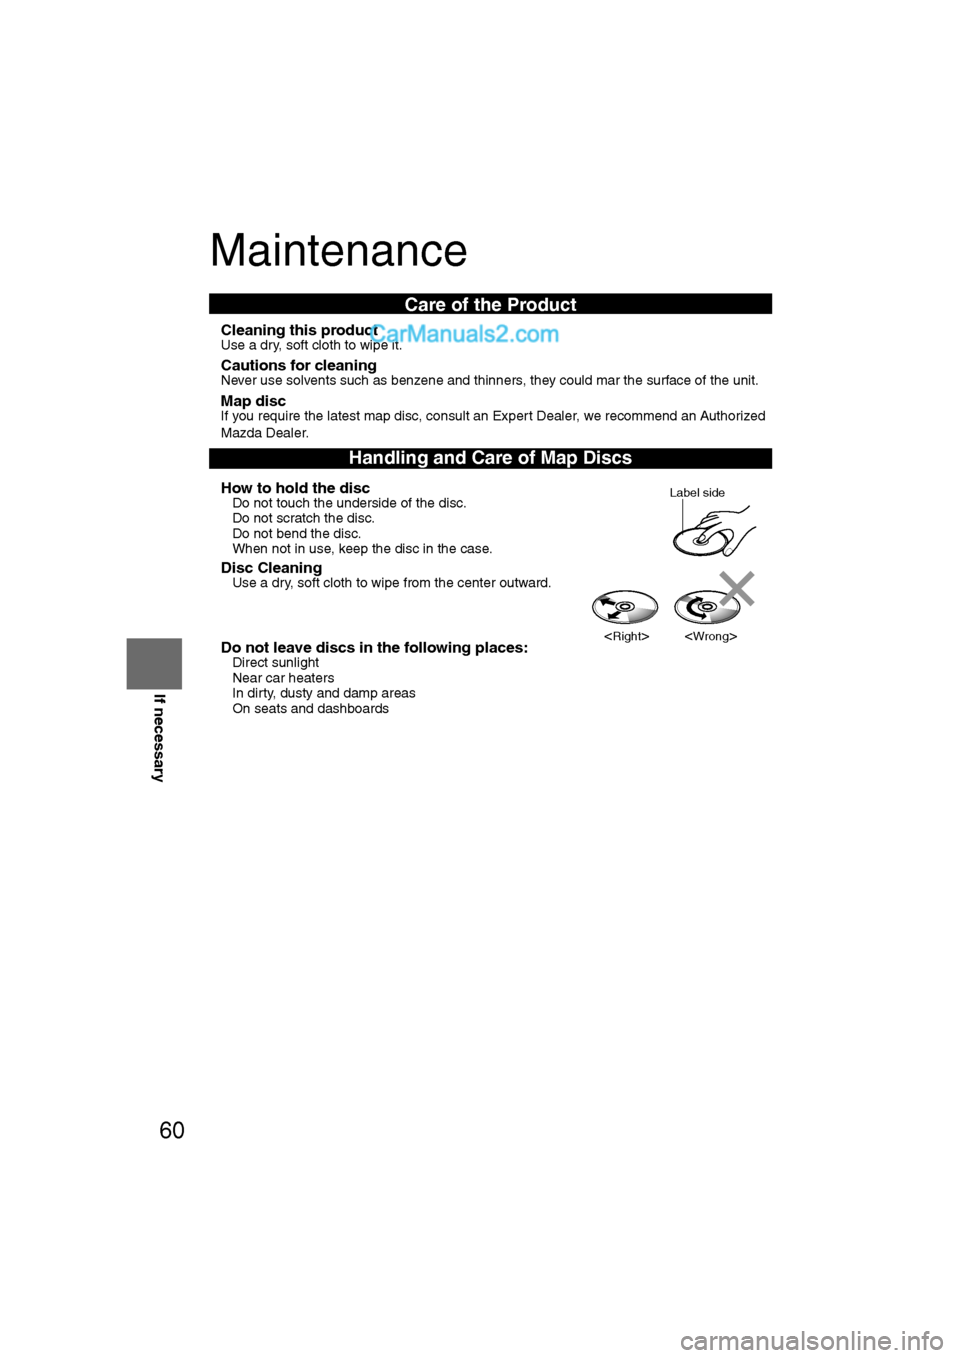 MAZDA MODEL CX-9 2008  Navigation Manual (in English) 60
RoutingAddress 
Book
If necessary
Maintenance
nCleaning this productUse a dry, soft cloth to wipe it.
nCautions for cleaningNever use solvents such as benzene and thinners, they could mar the surfa